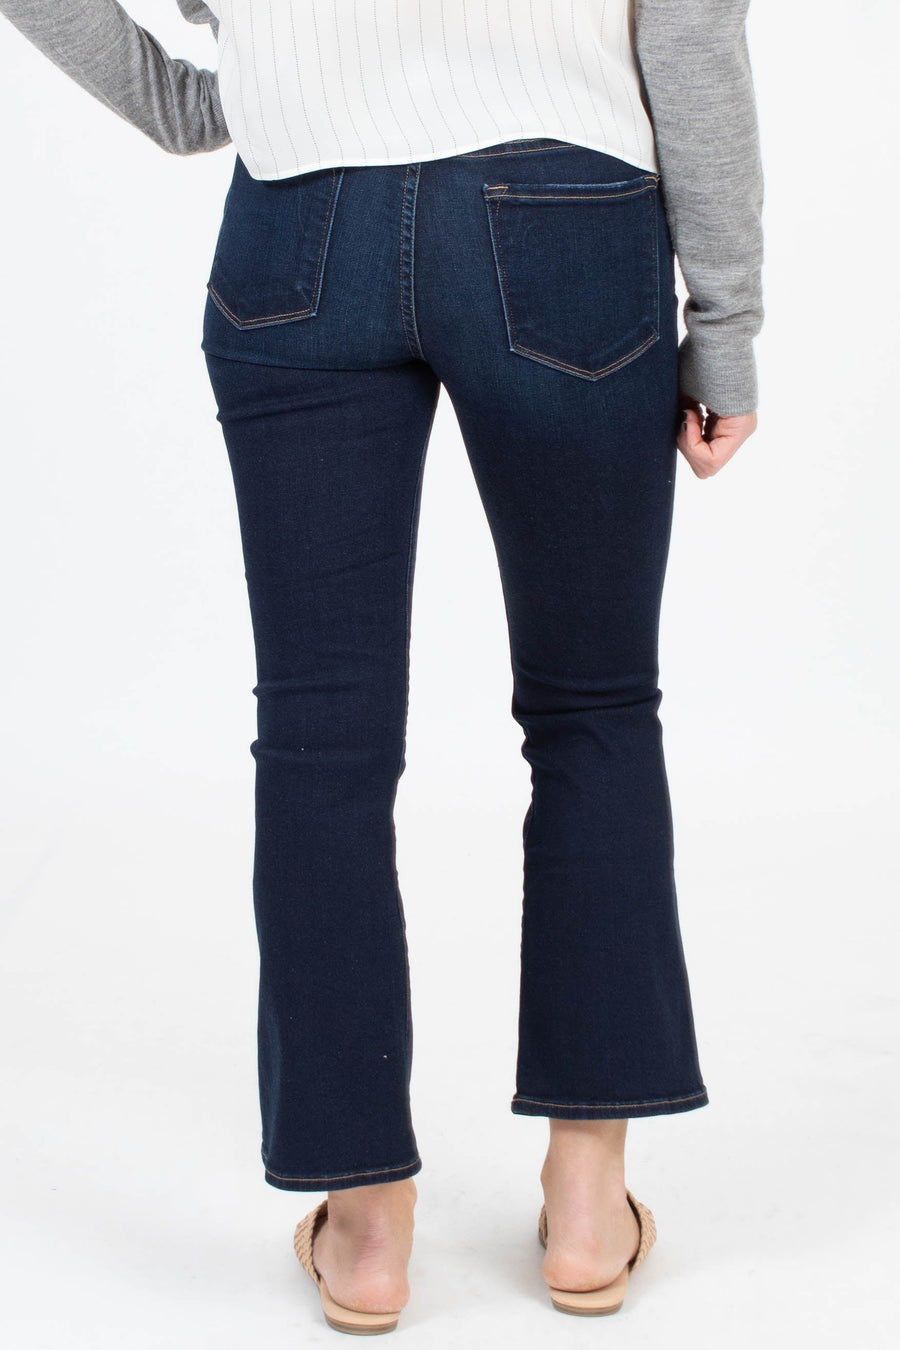 FRAME Clothing Small | 26 "Le Crop Mini Boot" Jeans